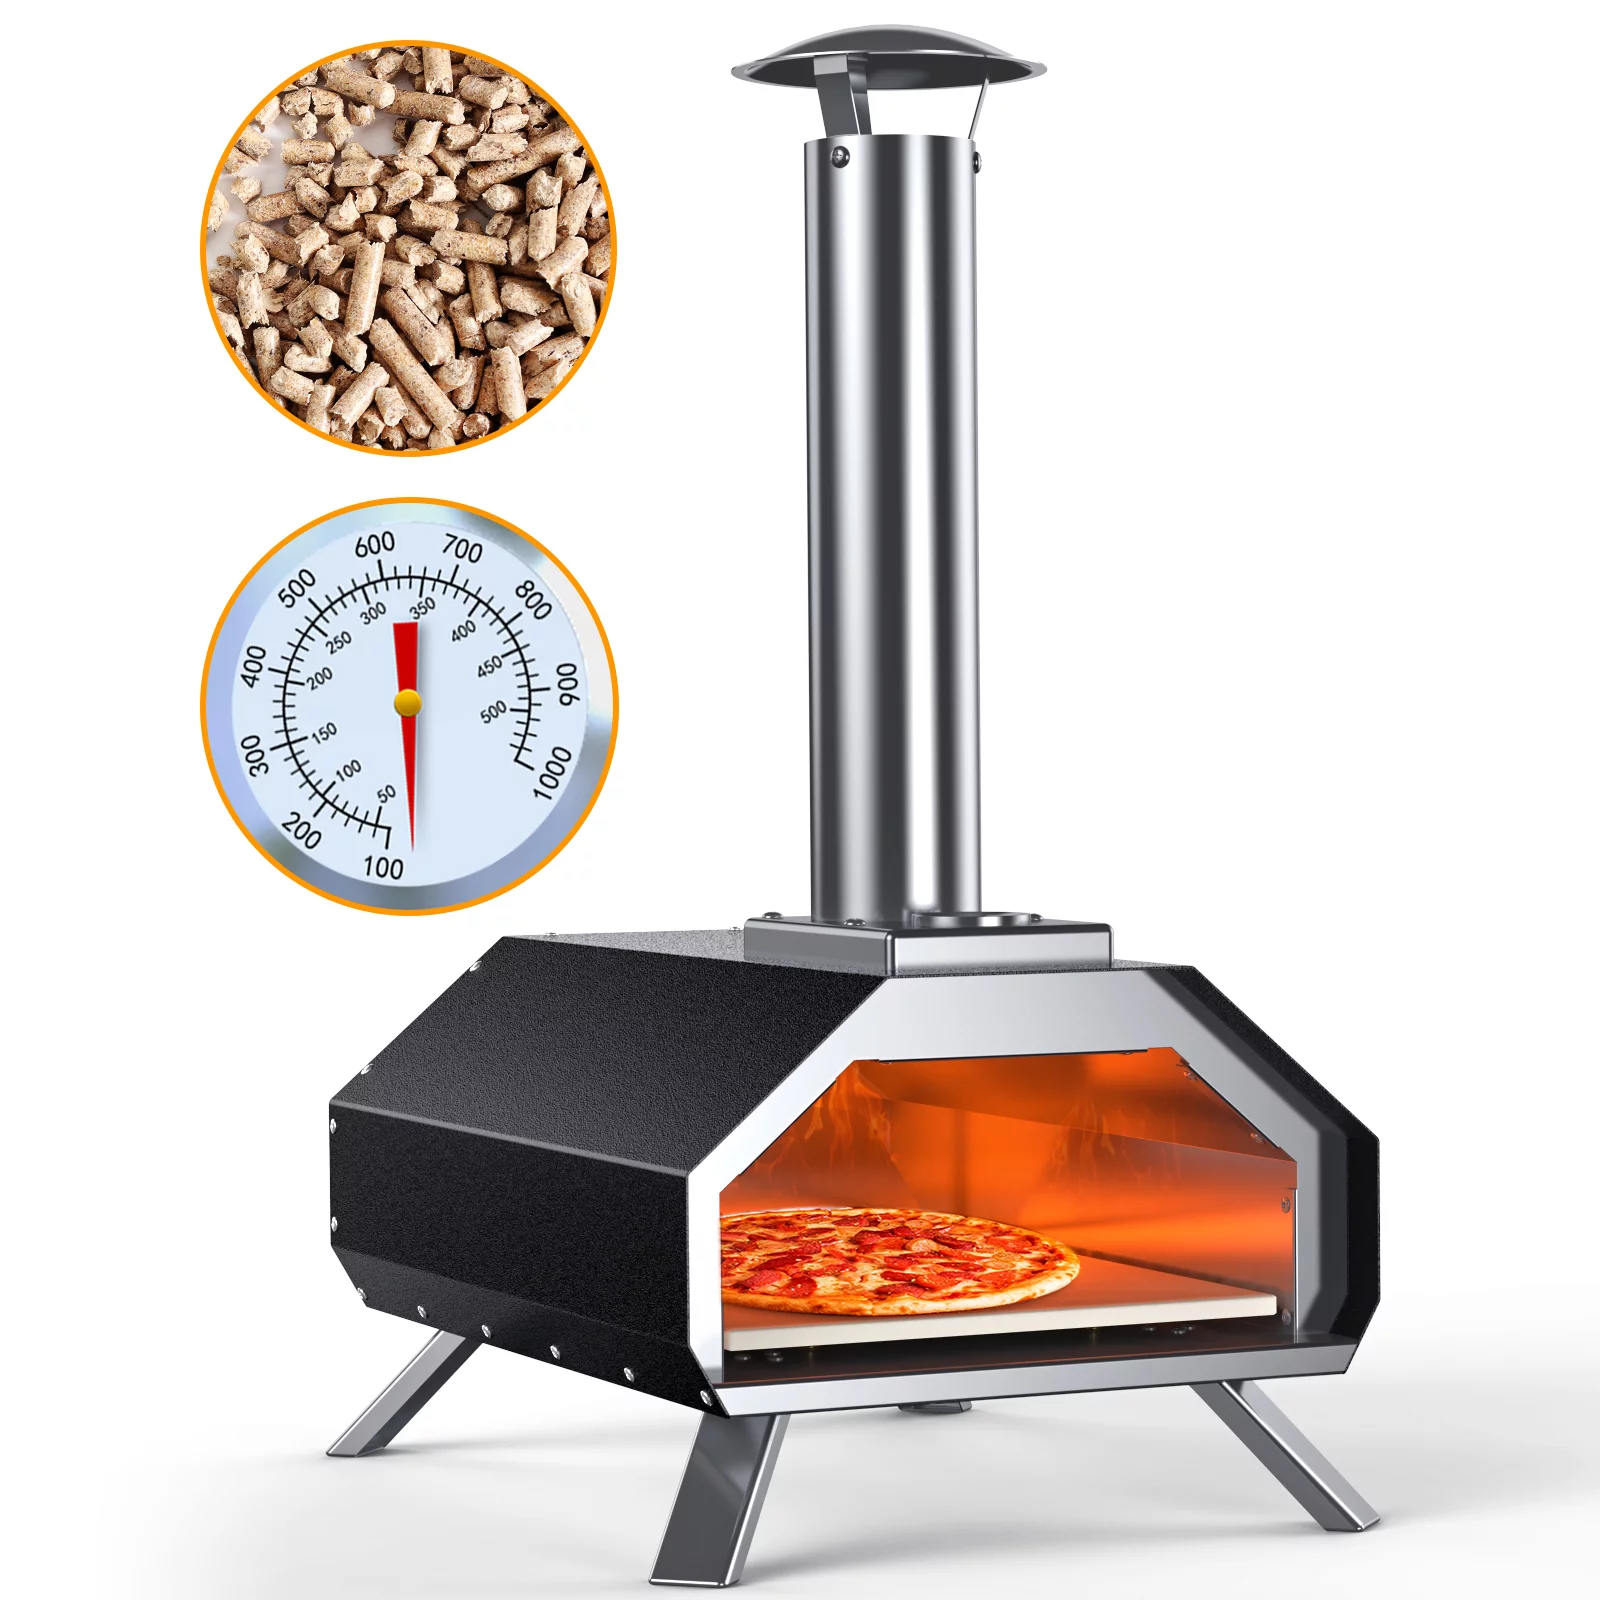 Pizza Oven Outdoor 13" Wood Fired Pizza Ovens Portable Stainless Steel Pizza Grill for Outside Backyard Camping Picnics Pizza Grill,Father's Day Gift